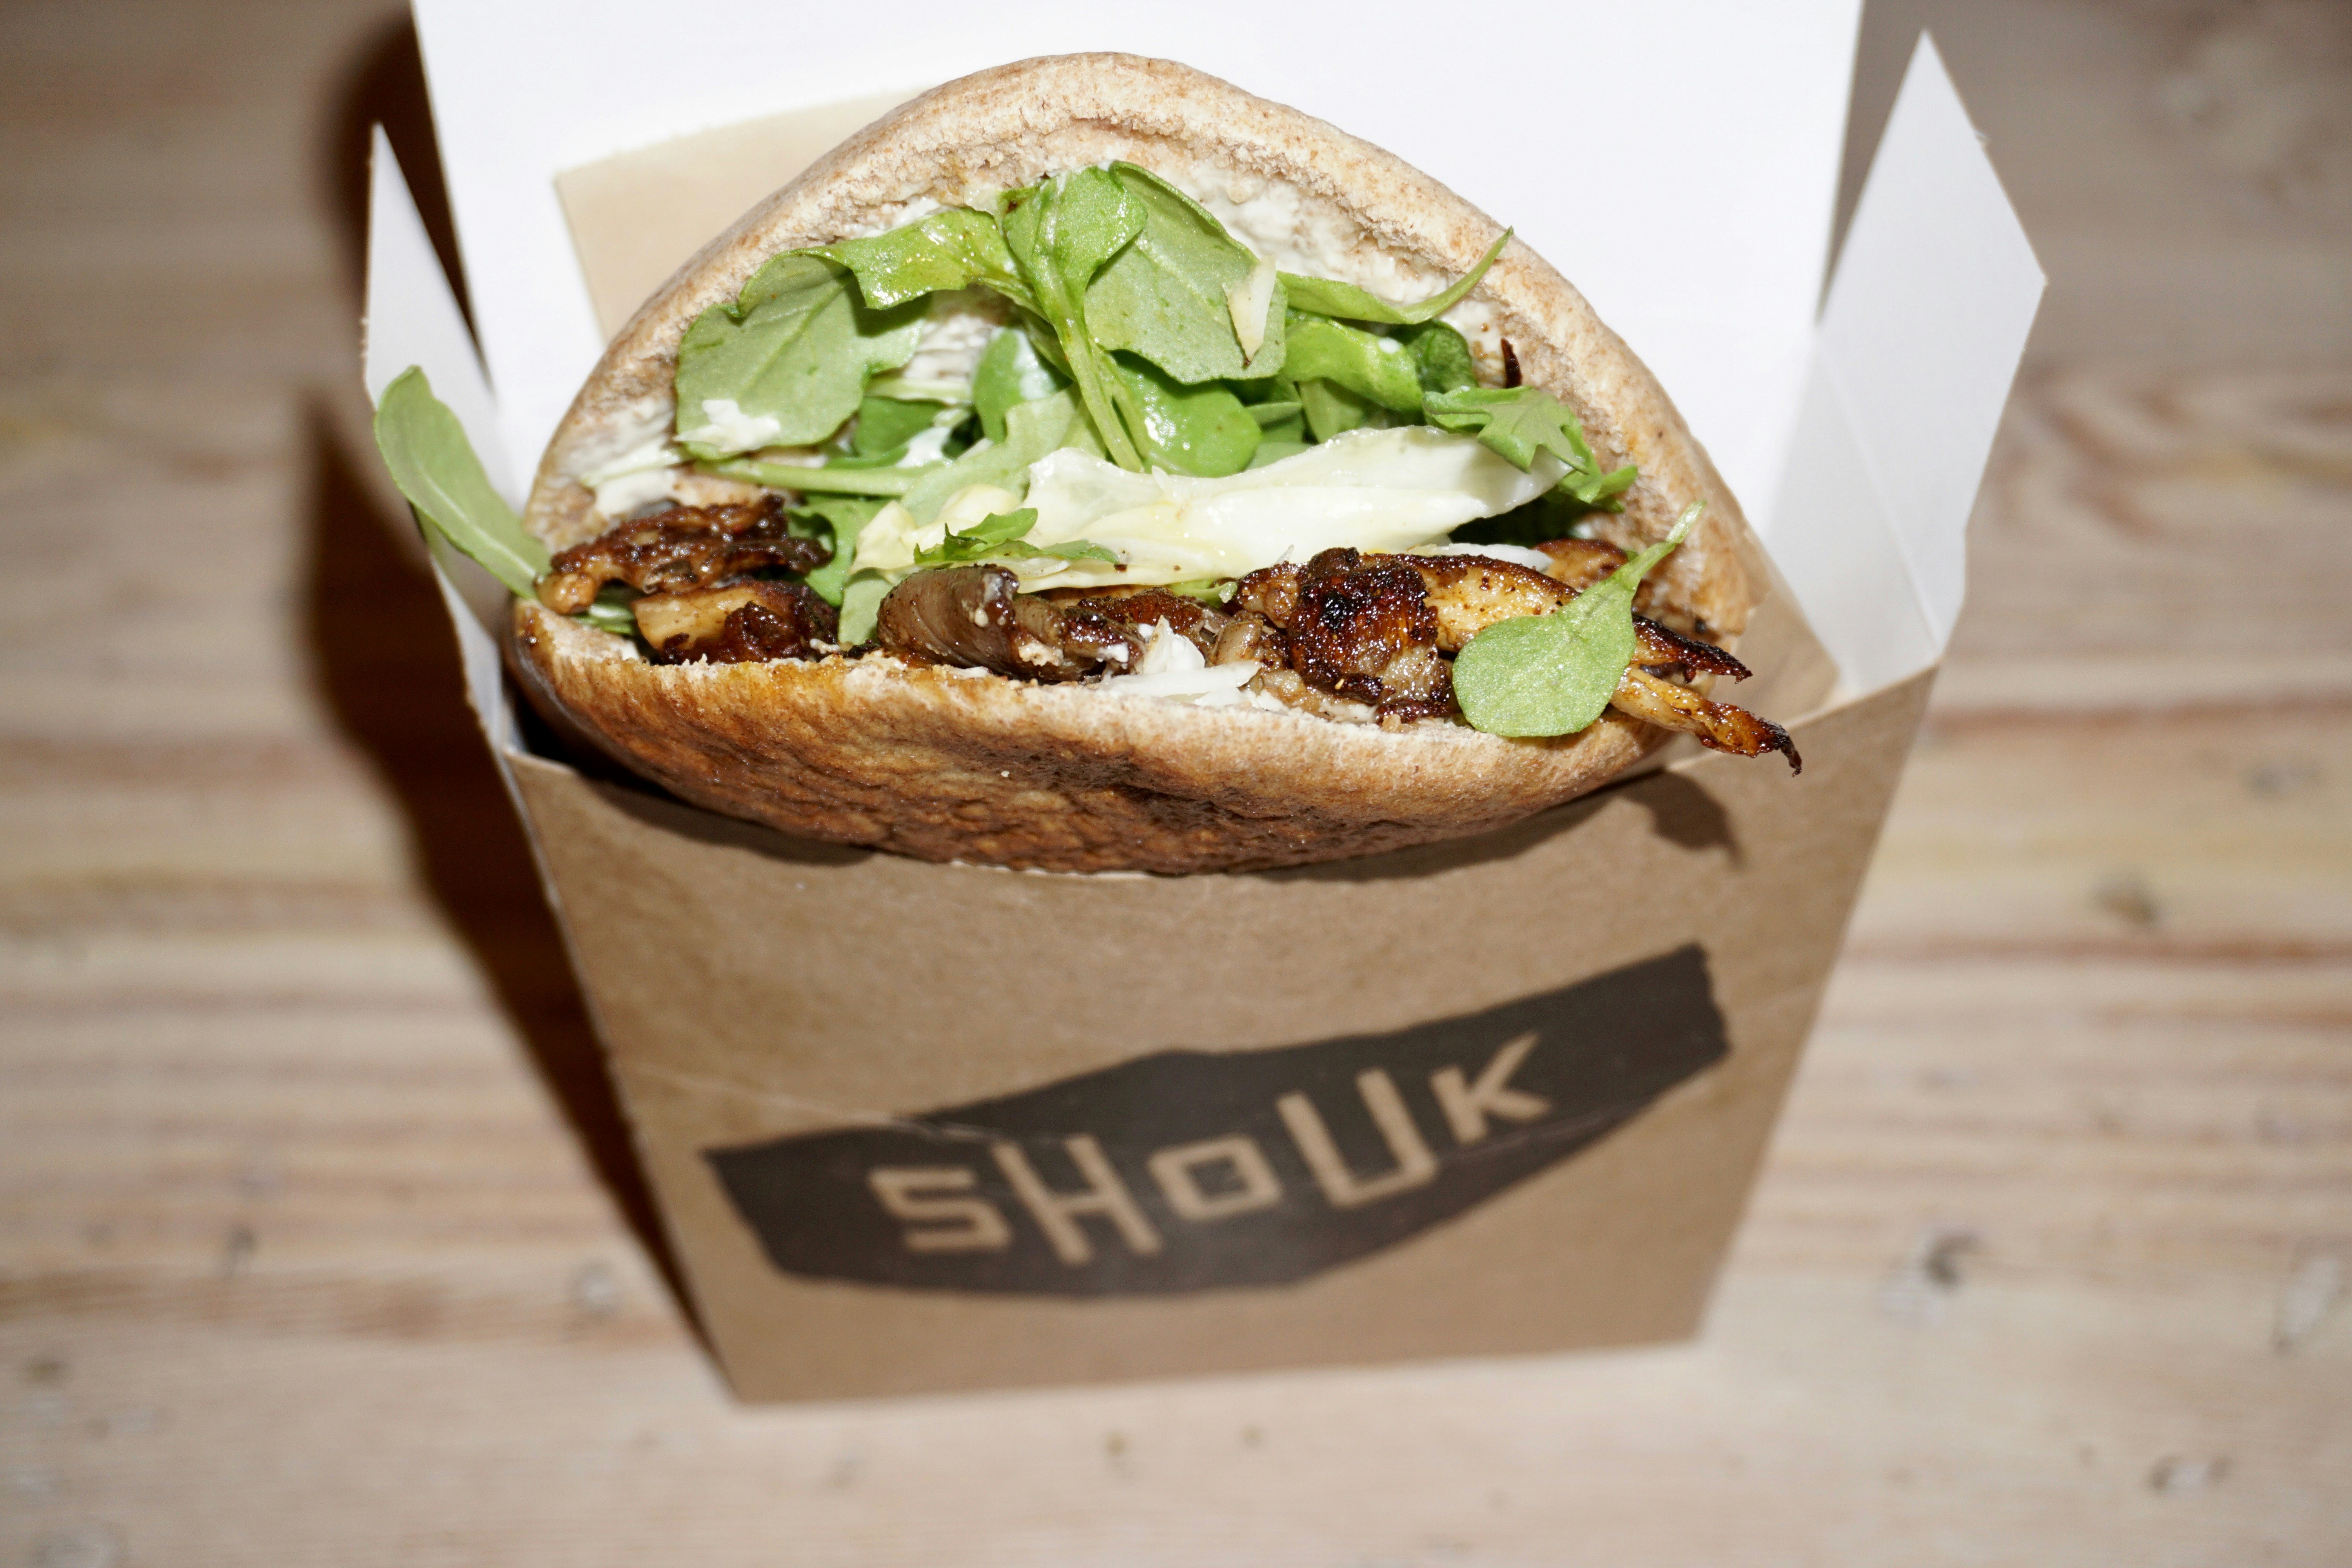 A cardboard box with "Shouk" printed on the front has a pita inside; it's stuffed with vegan ingredients such a mushrooms and green leaves.